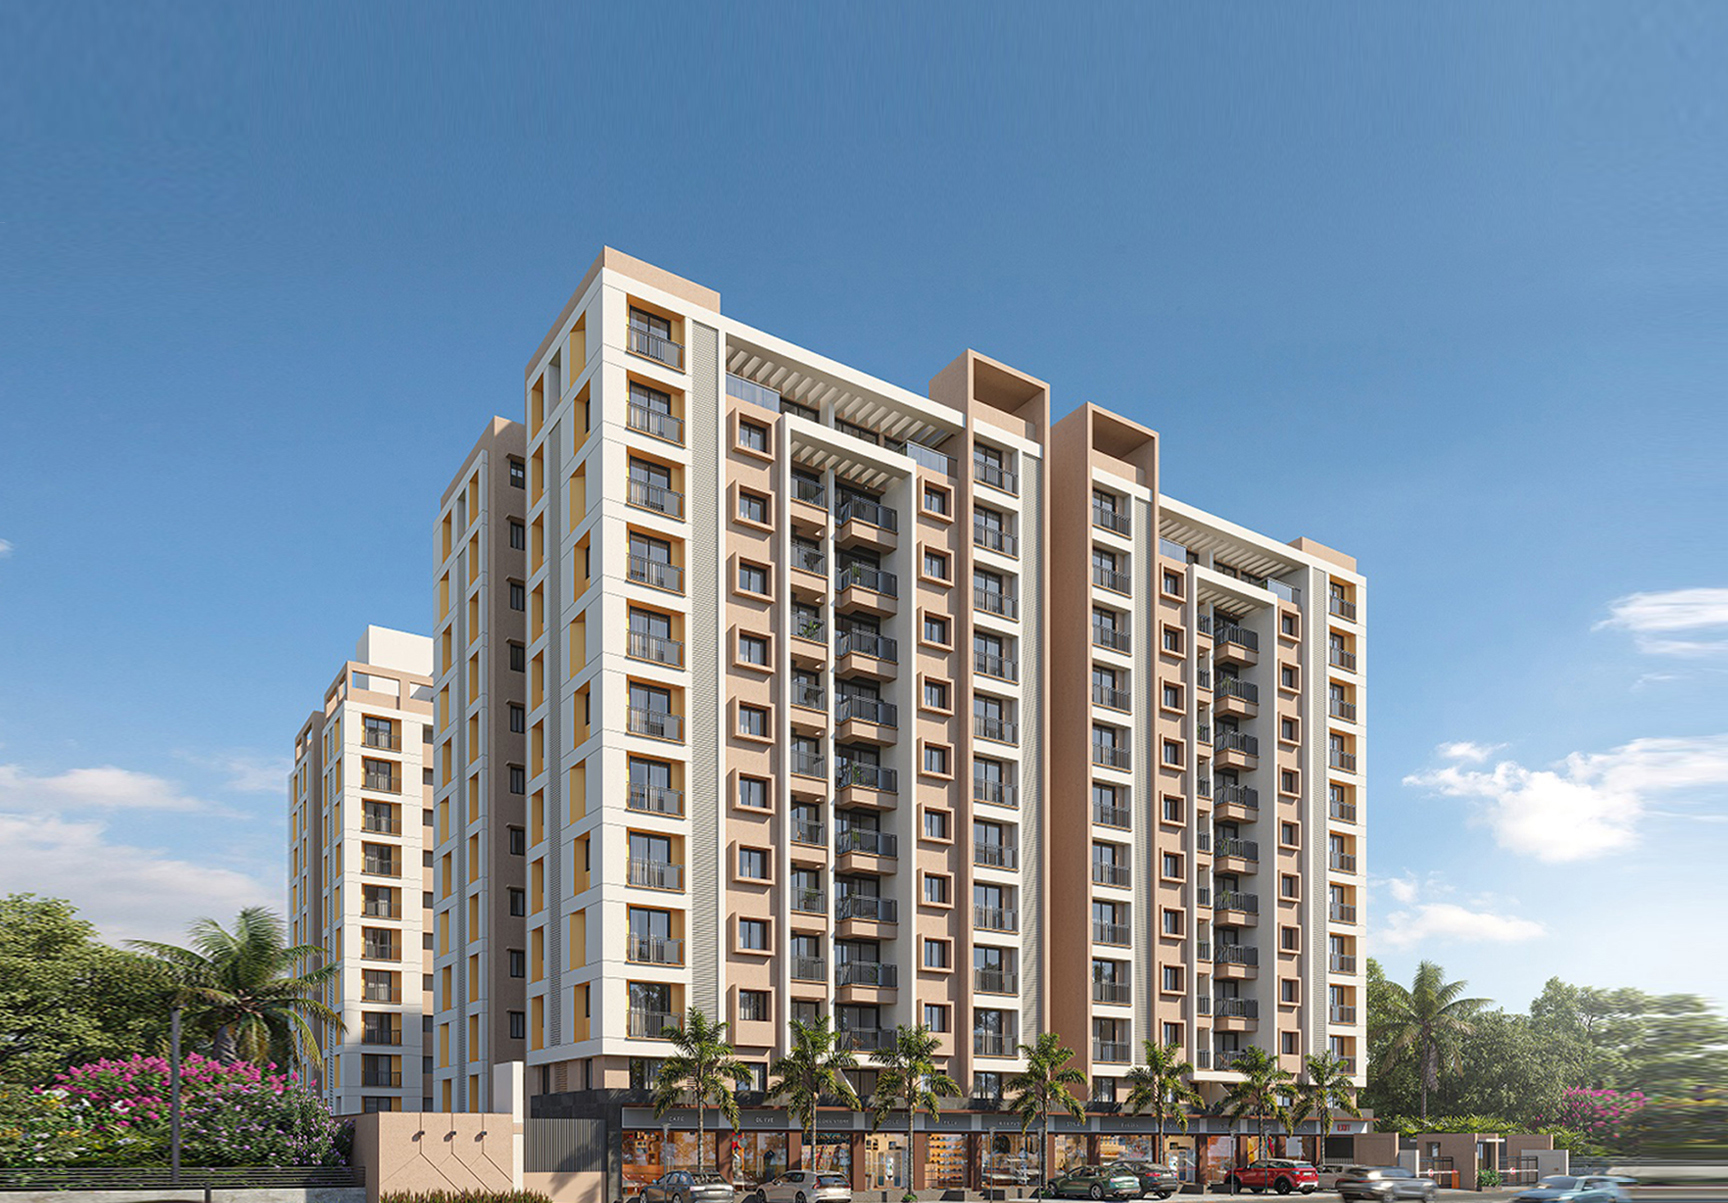 2 and 3 BHK apartment in bhestan 